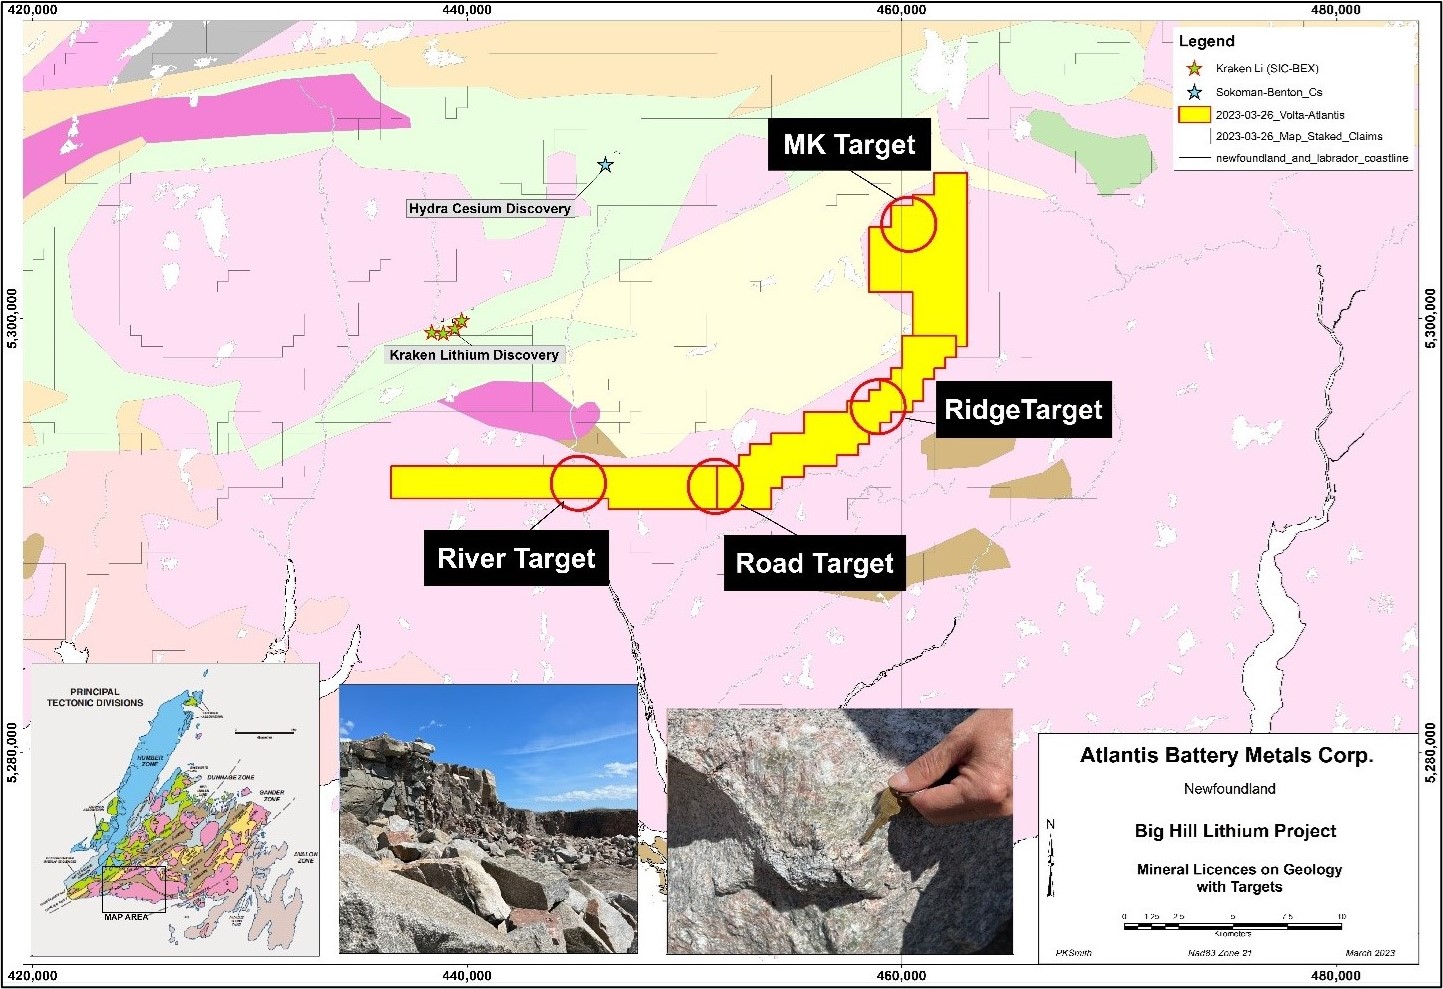 Image 2: Priority Target Areas, Big Hill Lithium Project, Newfoundland, Canada